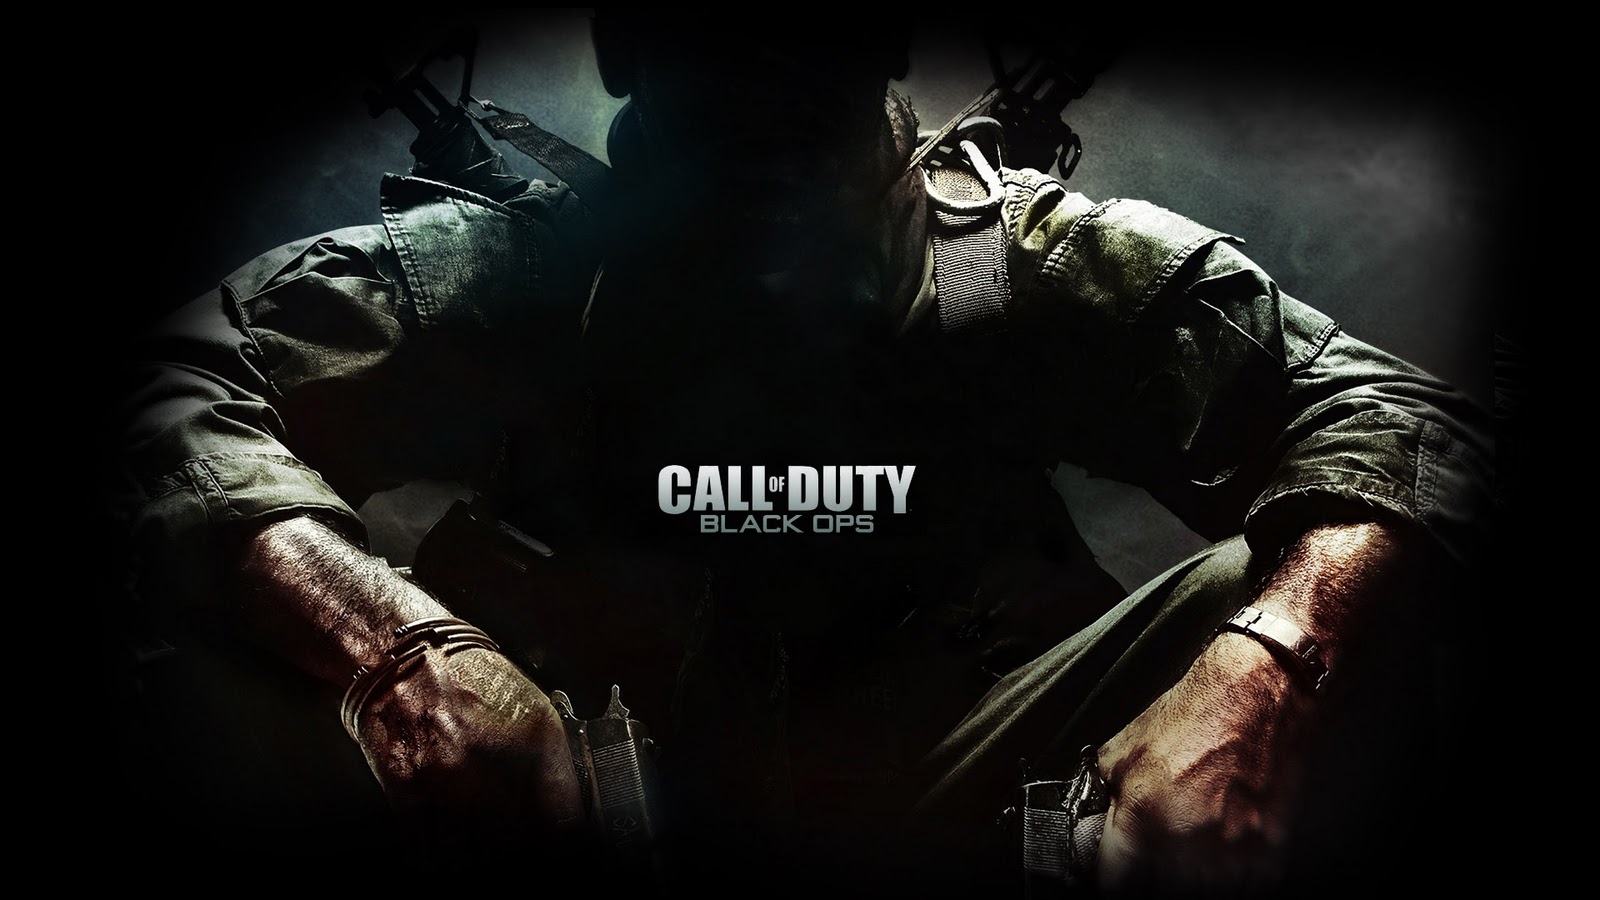 Call of Duty Black Ops Wallpaper